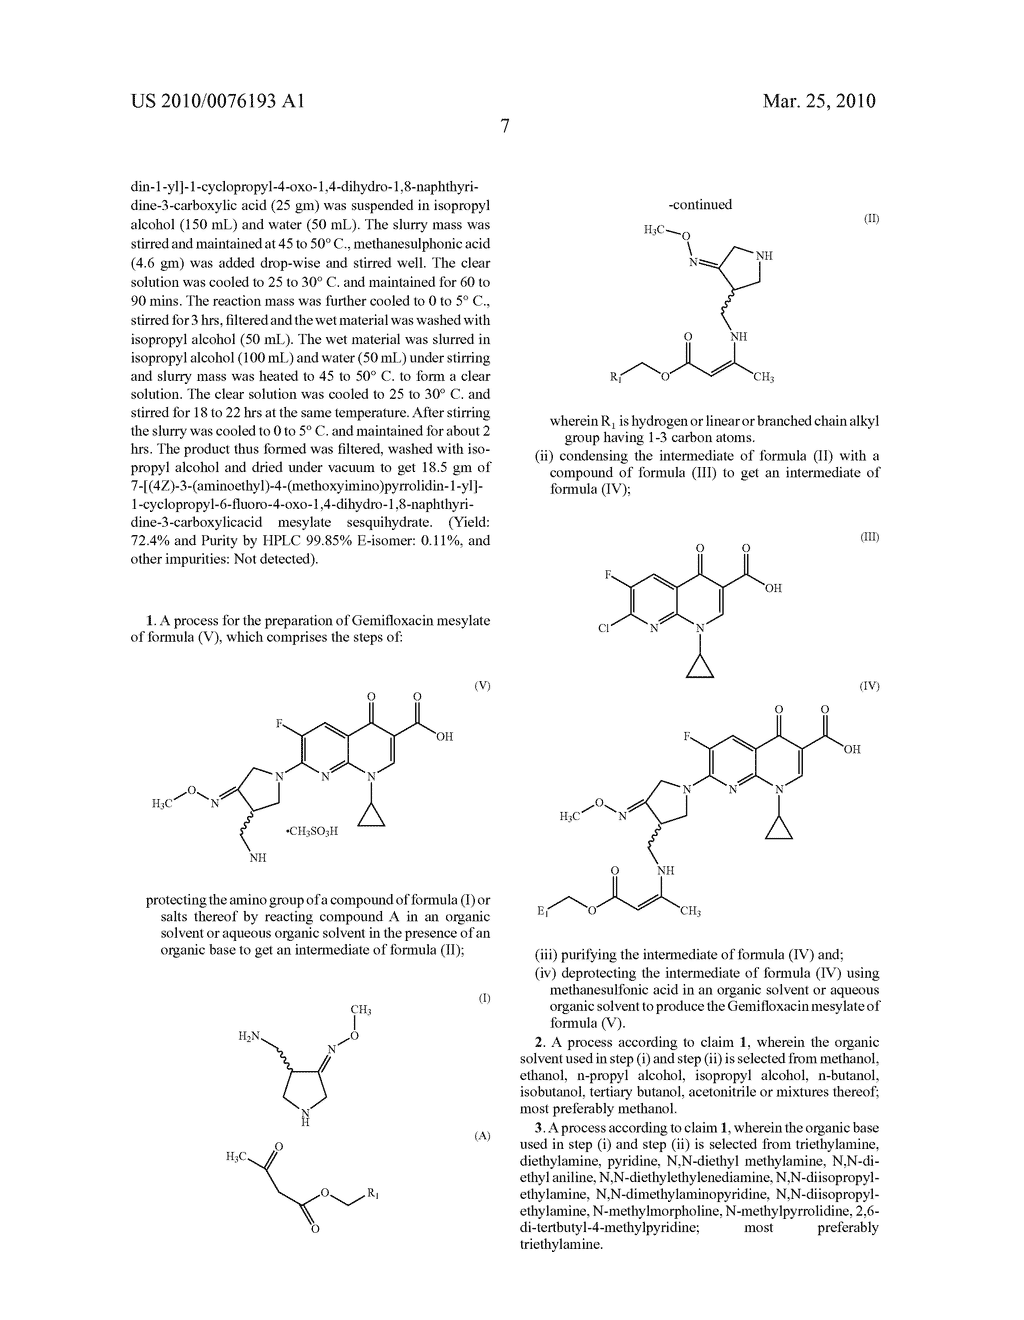  PROCESS FOR THE PREPARATION OF GEMIFLOXACIN - diagram, schematic, and image 10